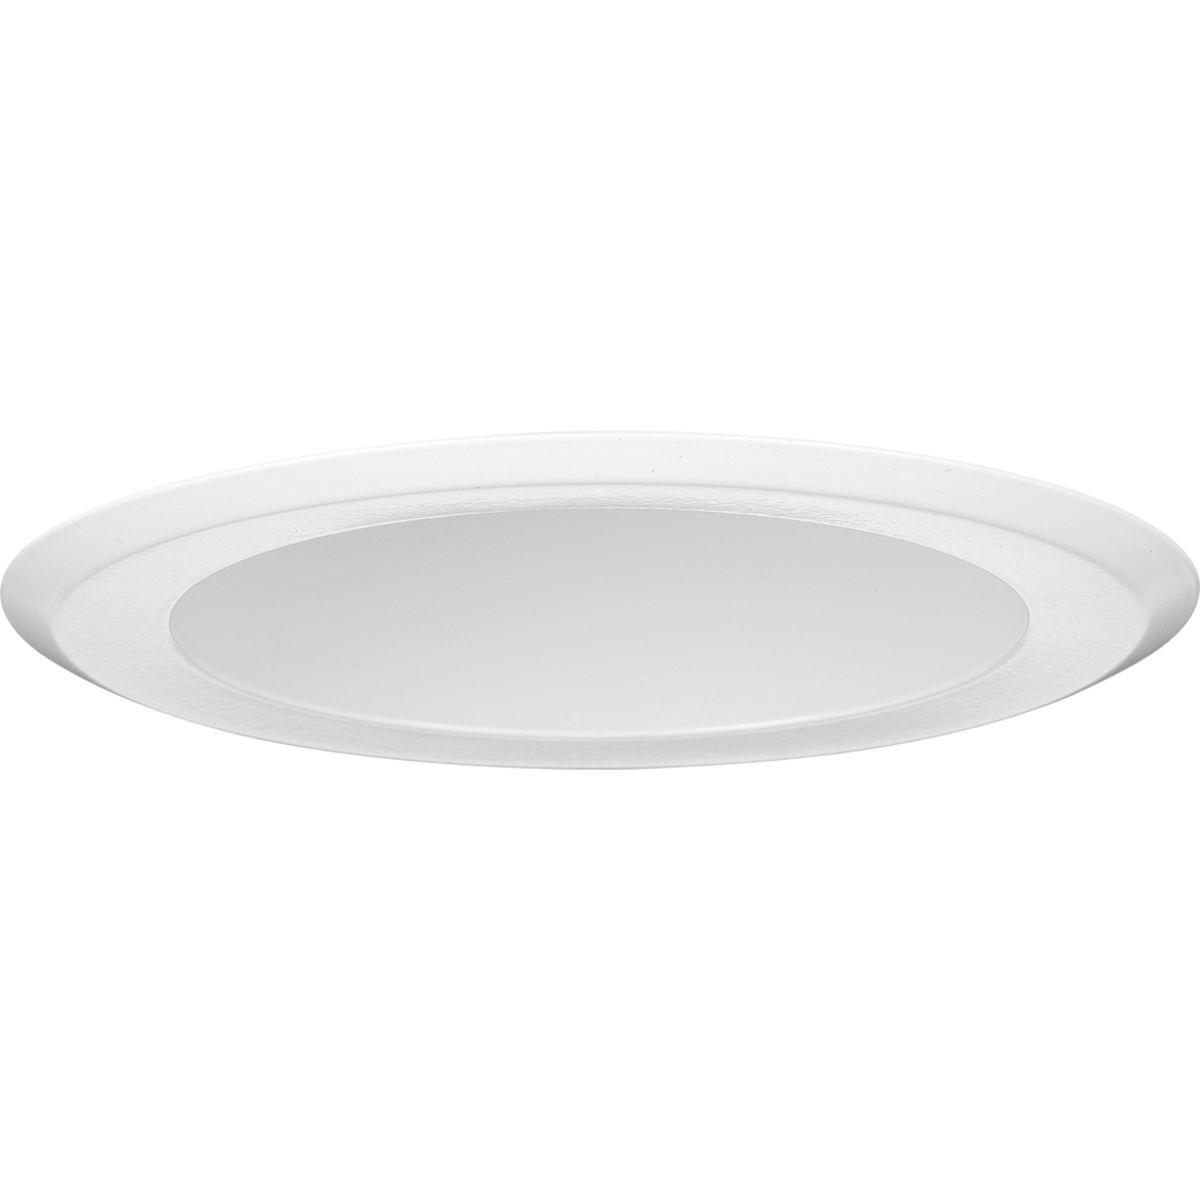 Hubbell P8268-28 5” Deep Open Trim in Satin White finish. UL and CUL listed for damp locations. The trim uses friction springs to attach to the housing to provide a flush fit against the ceiling. Compatible for use in Progress P851-ICAT.  ; 5" Deep open trim with gasket ;